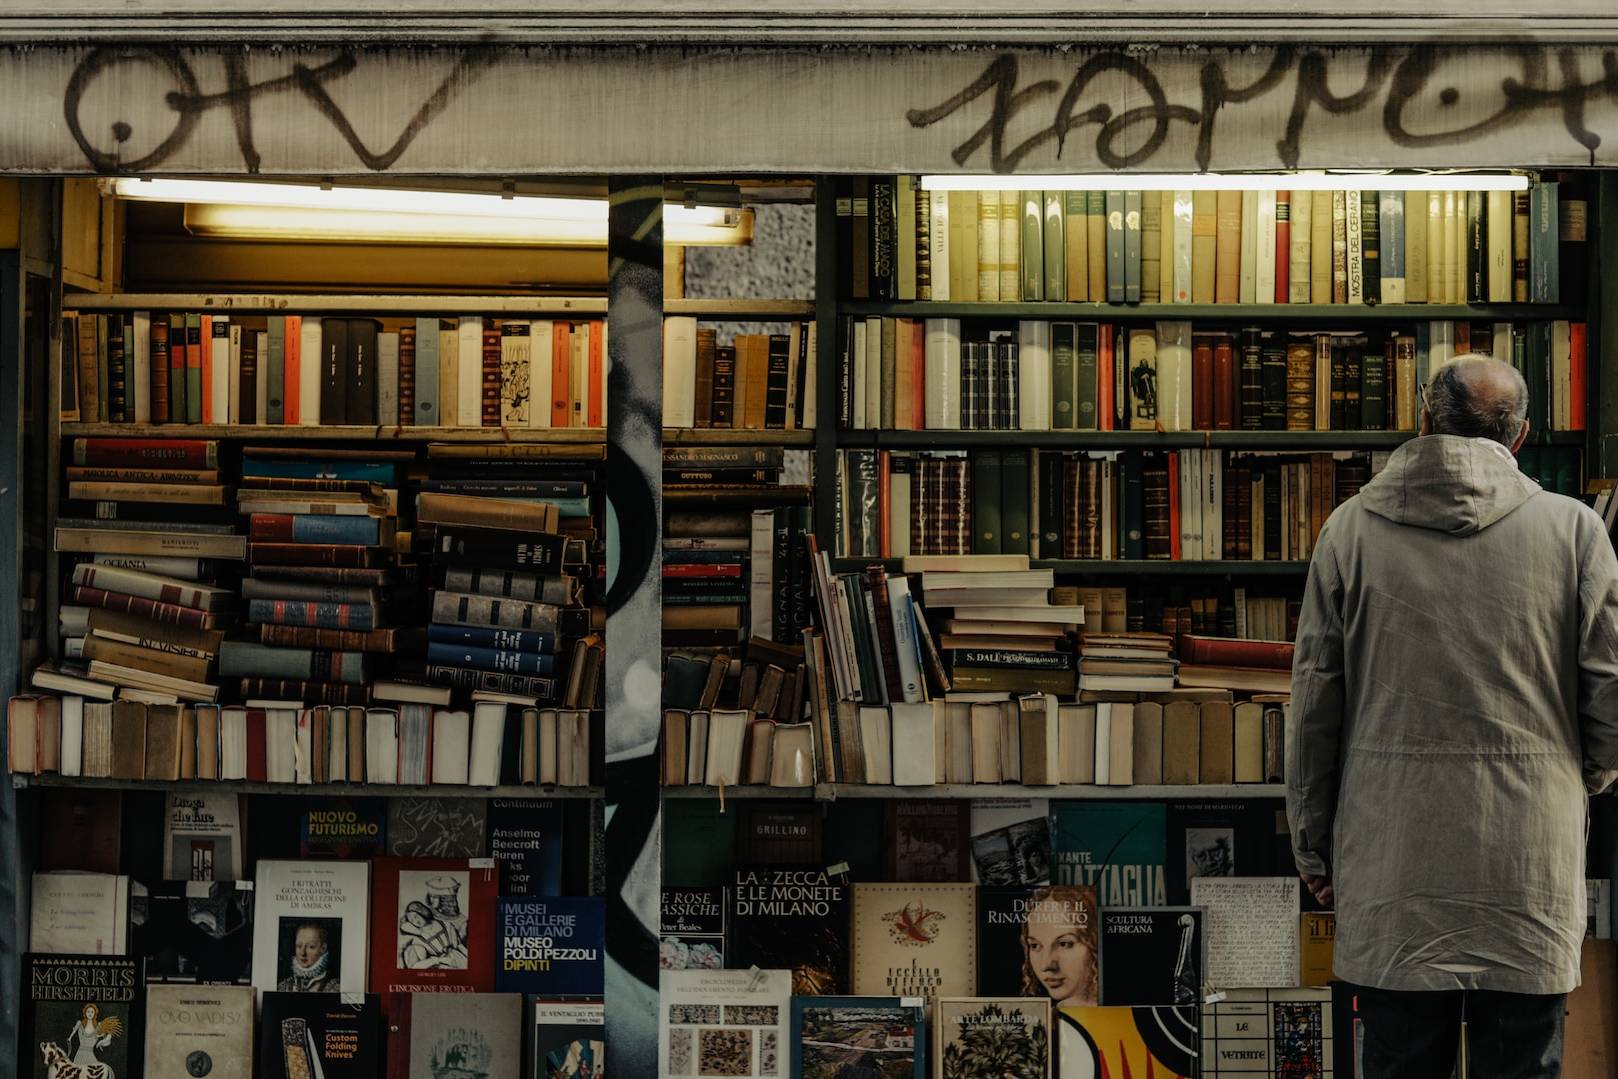 a man standing in front of a bookshelf filled with books